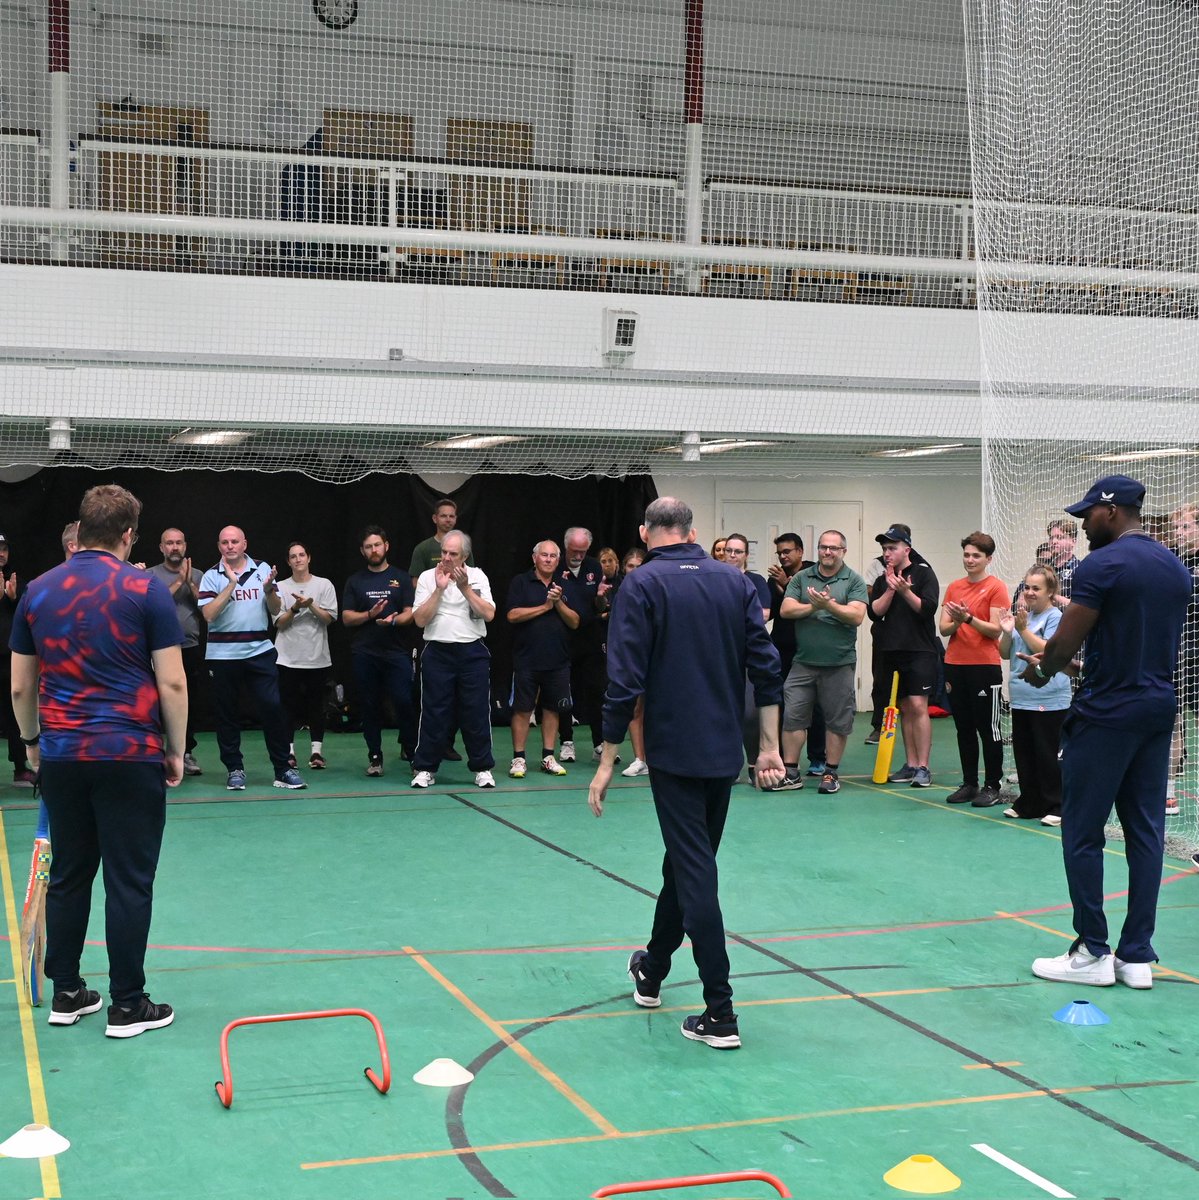 @KentCricket @Megansturge6 @ECBCA_Kent @icoachcricket Followed by a highly interactive session featuring the extremely knowledgeable Lou Arnold from @Active_Kent adding the latest messaging from @playtheirway and our own Brian Gasking to share knowledge from coaching Visually Impaired cricket.